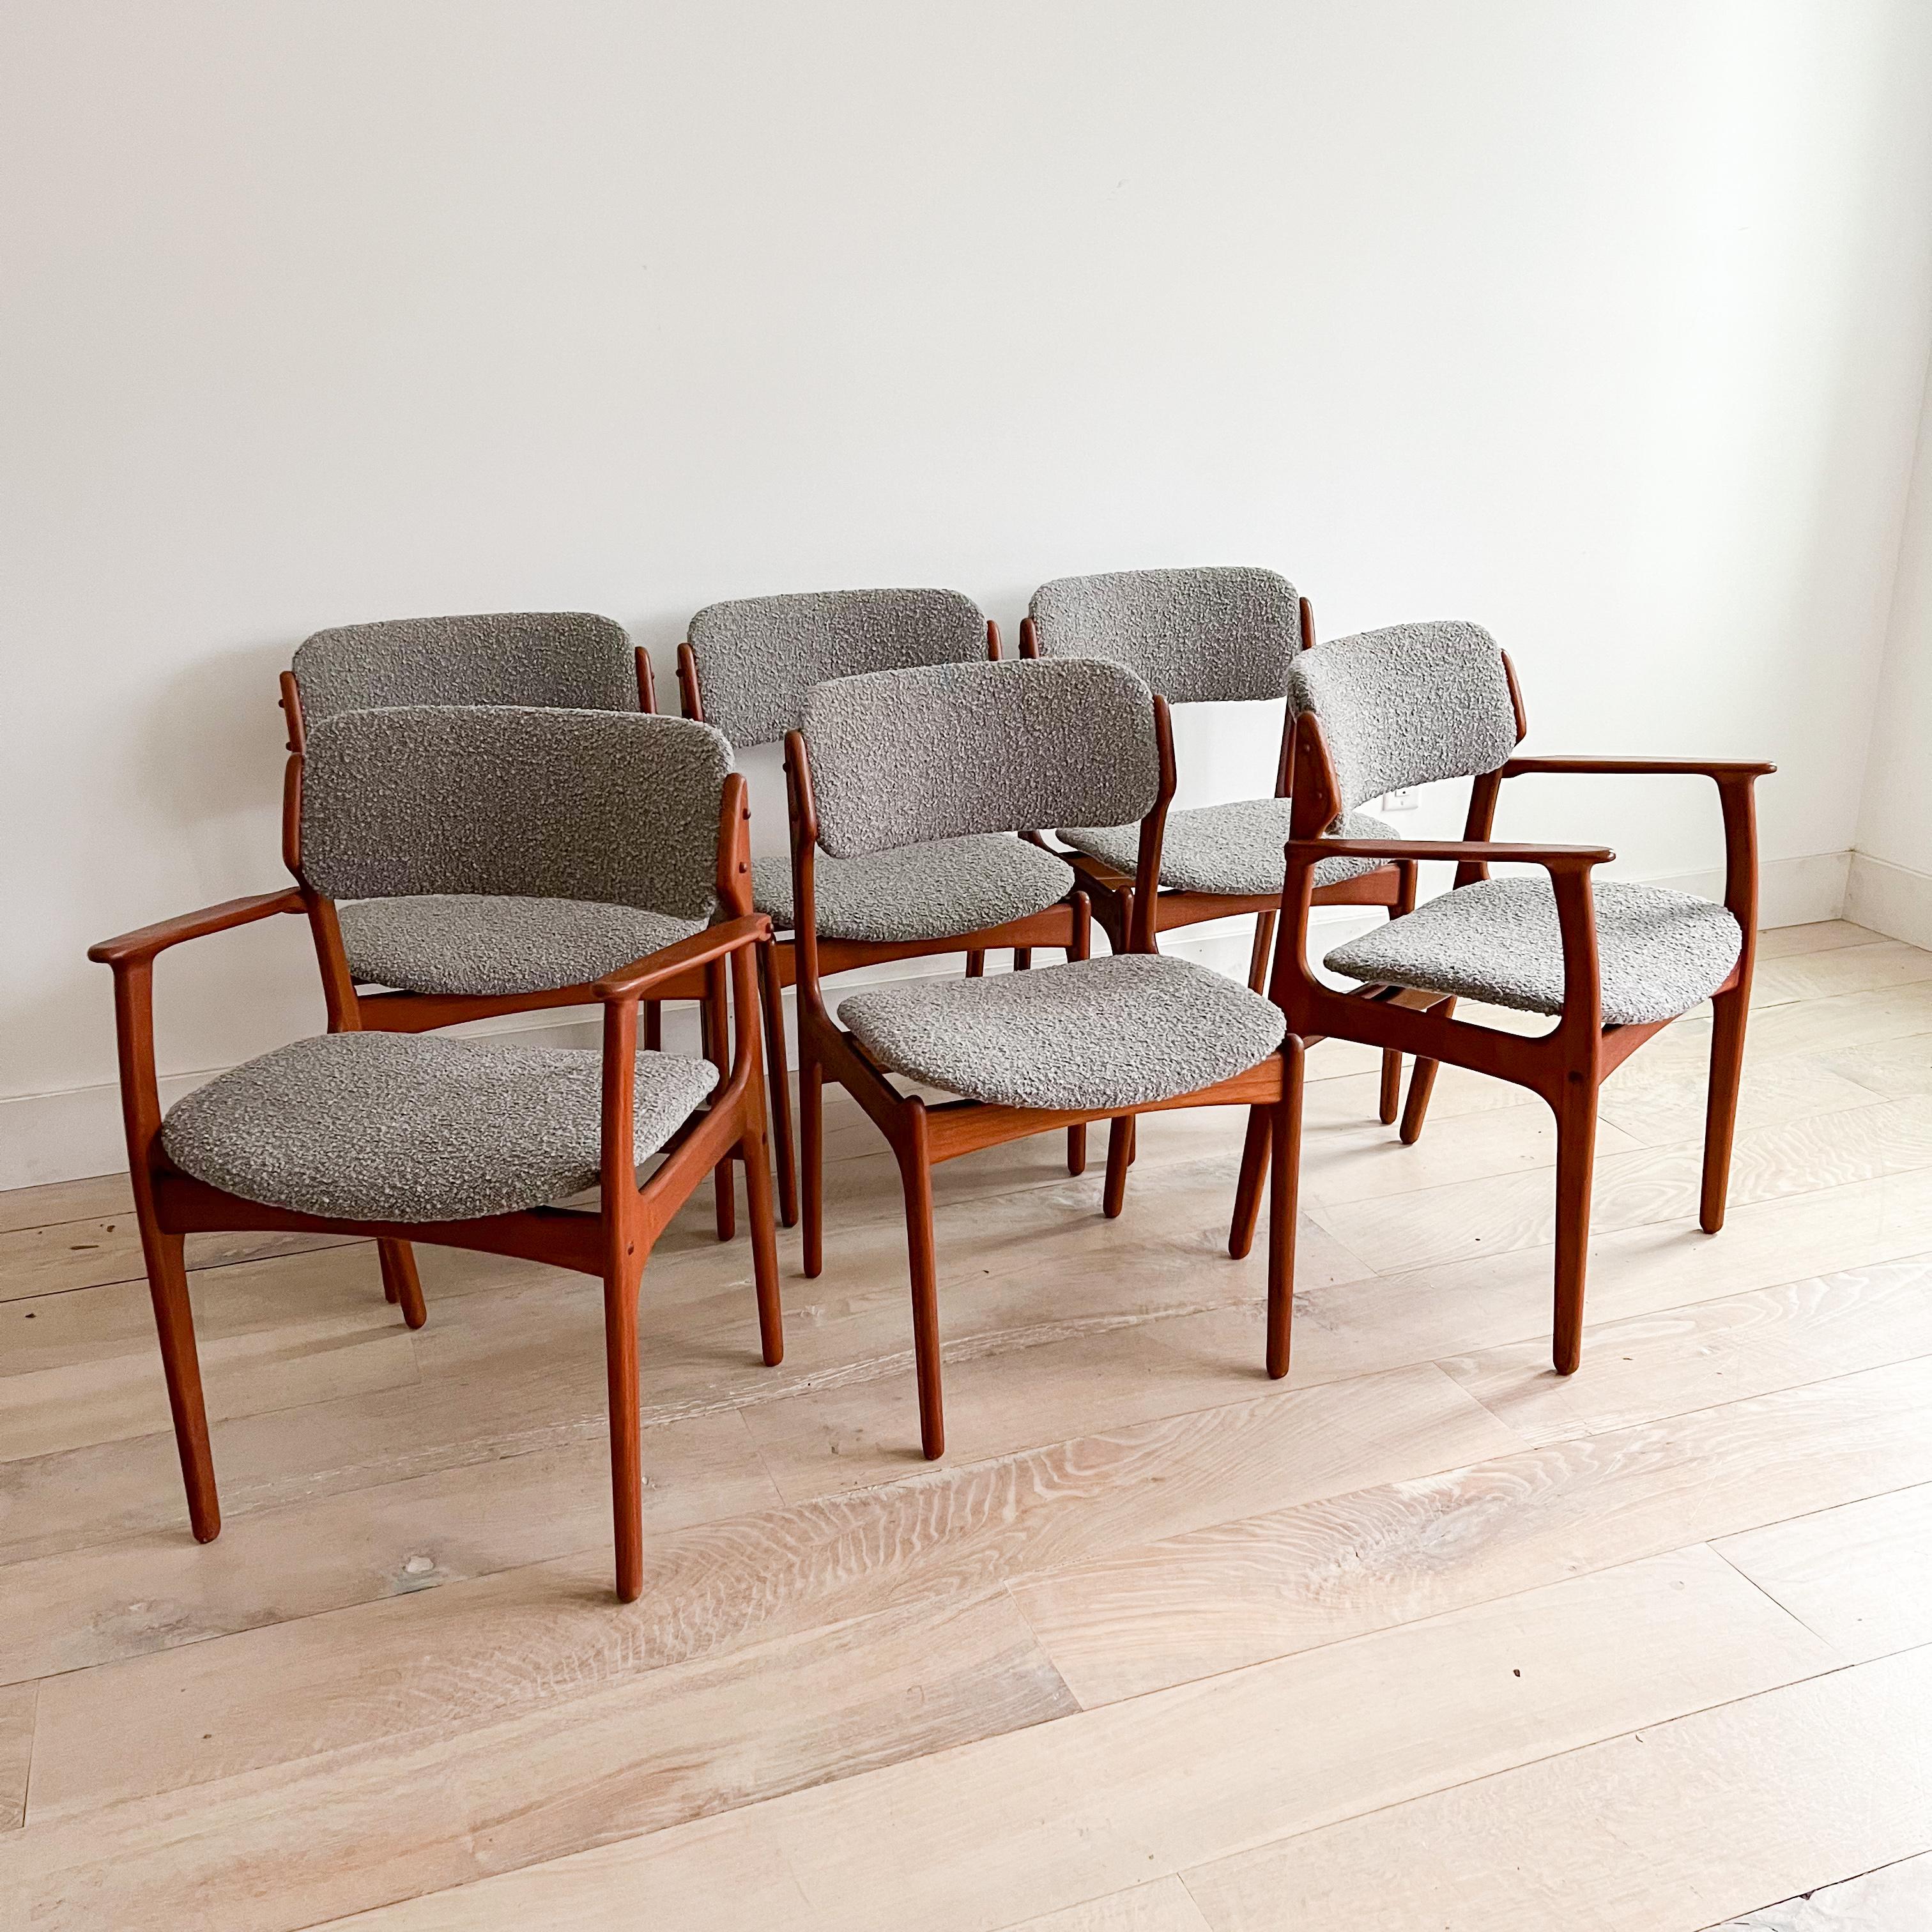 Set of 6 mid century modern danish teak “floating seat” dining chairs by Erik Buch. New light grey boucle upholstery. Some light scuffing/scratching from age appropriate wear to the teak frames. 

Armchairs - 23.75”x18.5” 17.5”SH 31.5”H

Armless